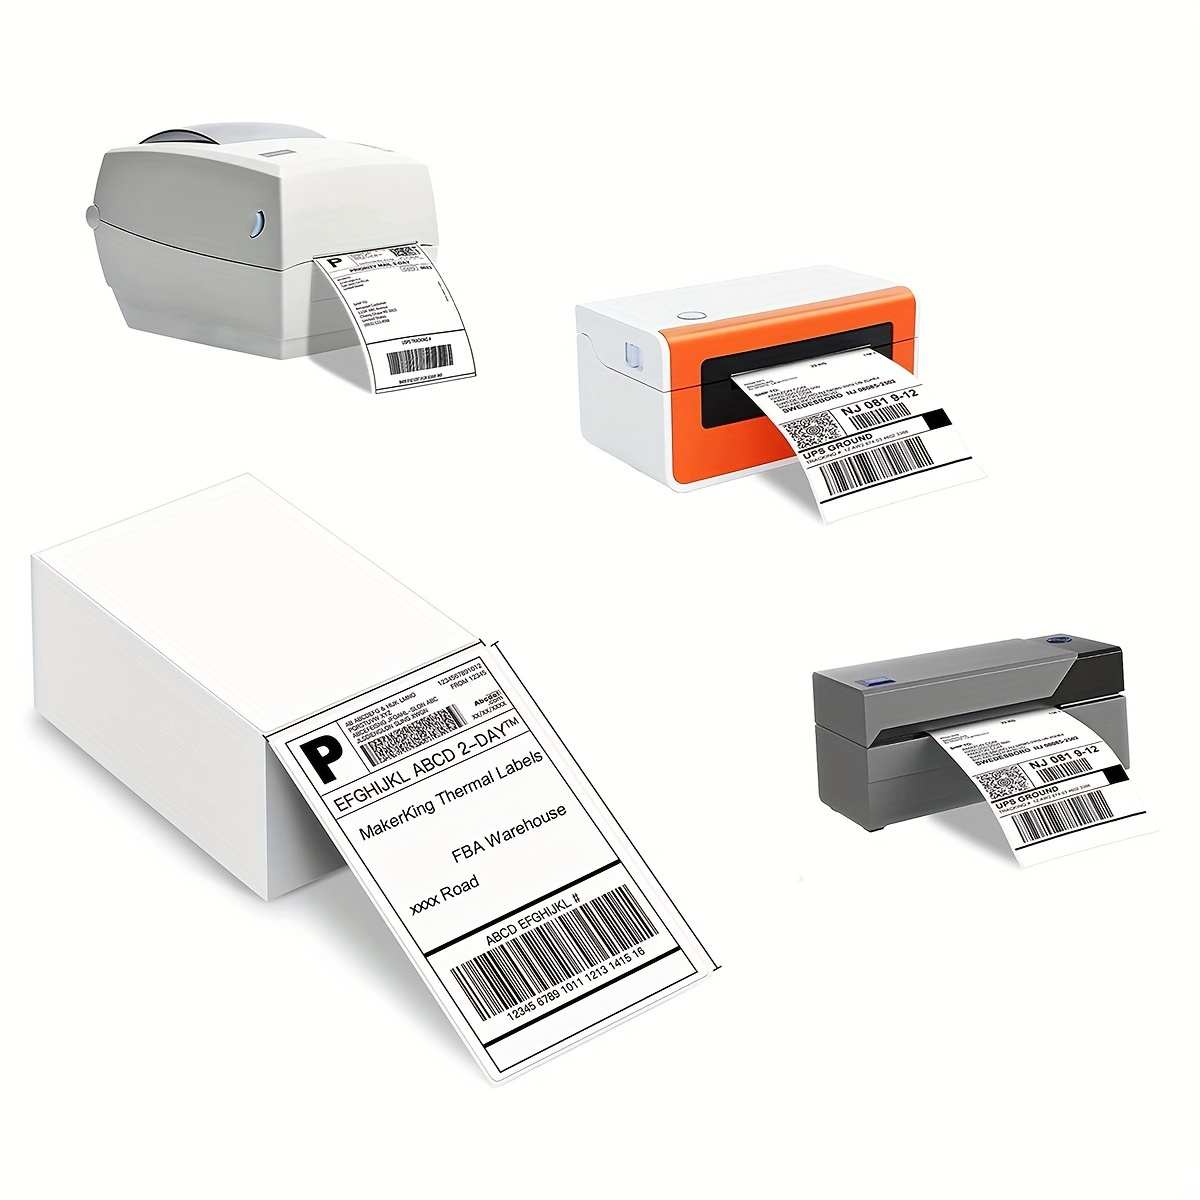  2x2Direct Thermal Labels for Marklife P50 Label Printer,  Multi-Purpose Self-Adhesive Direct Thermal Labels for Business, Home,  Office,150 Labels/Roll : Electronics